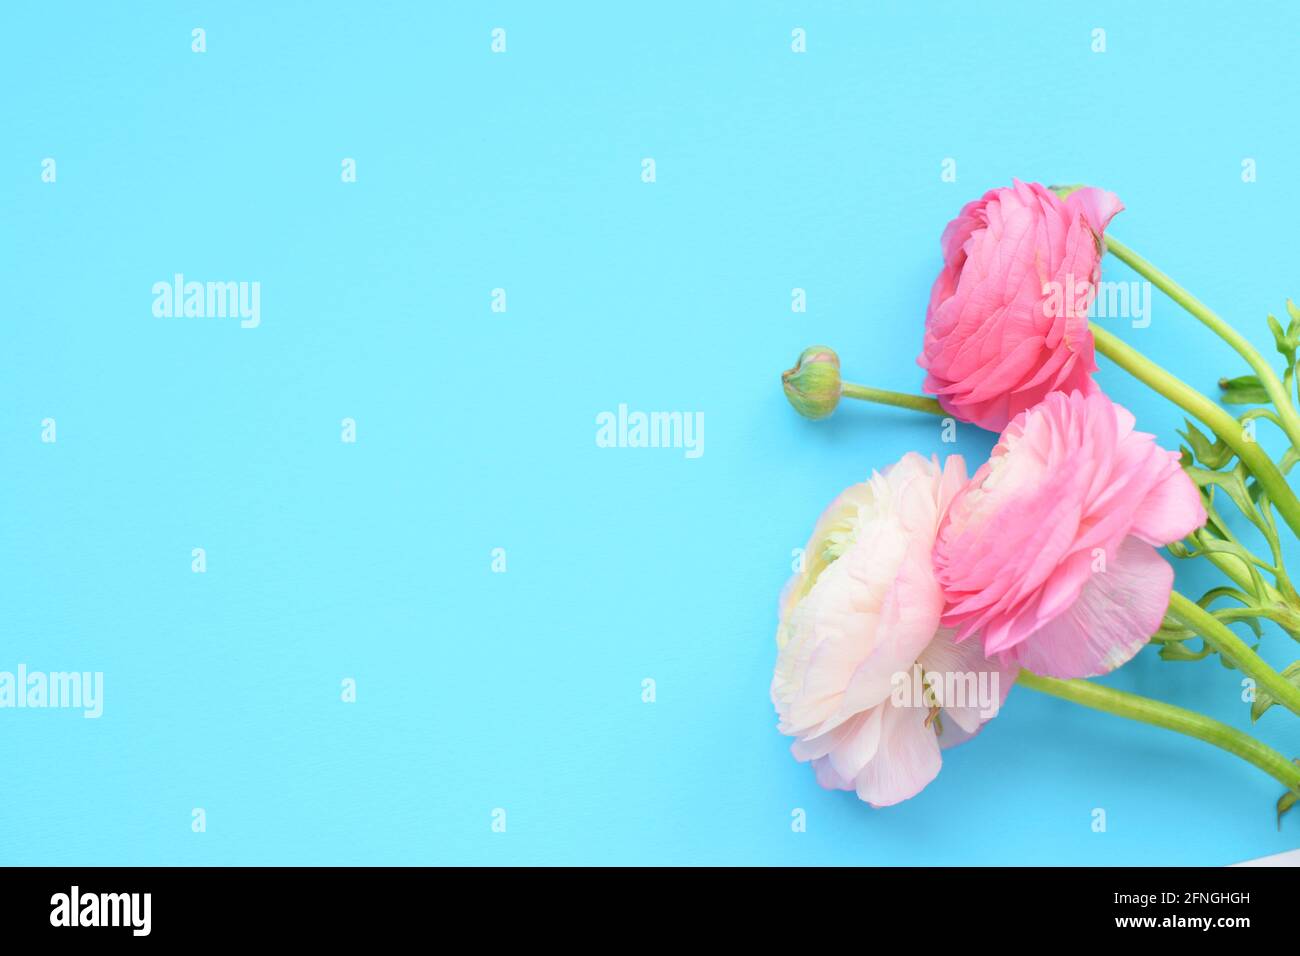 Beautiful bouquet of pink ranunculus flowers on a blue background. Flowers buttercup. Copy space for text Stock Photo